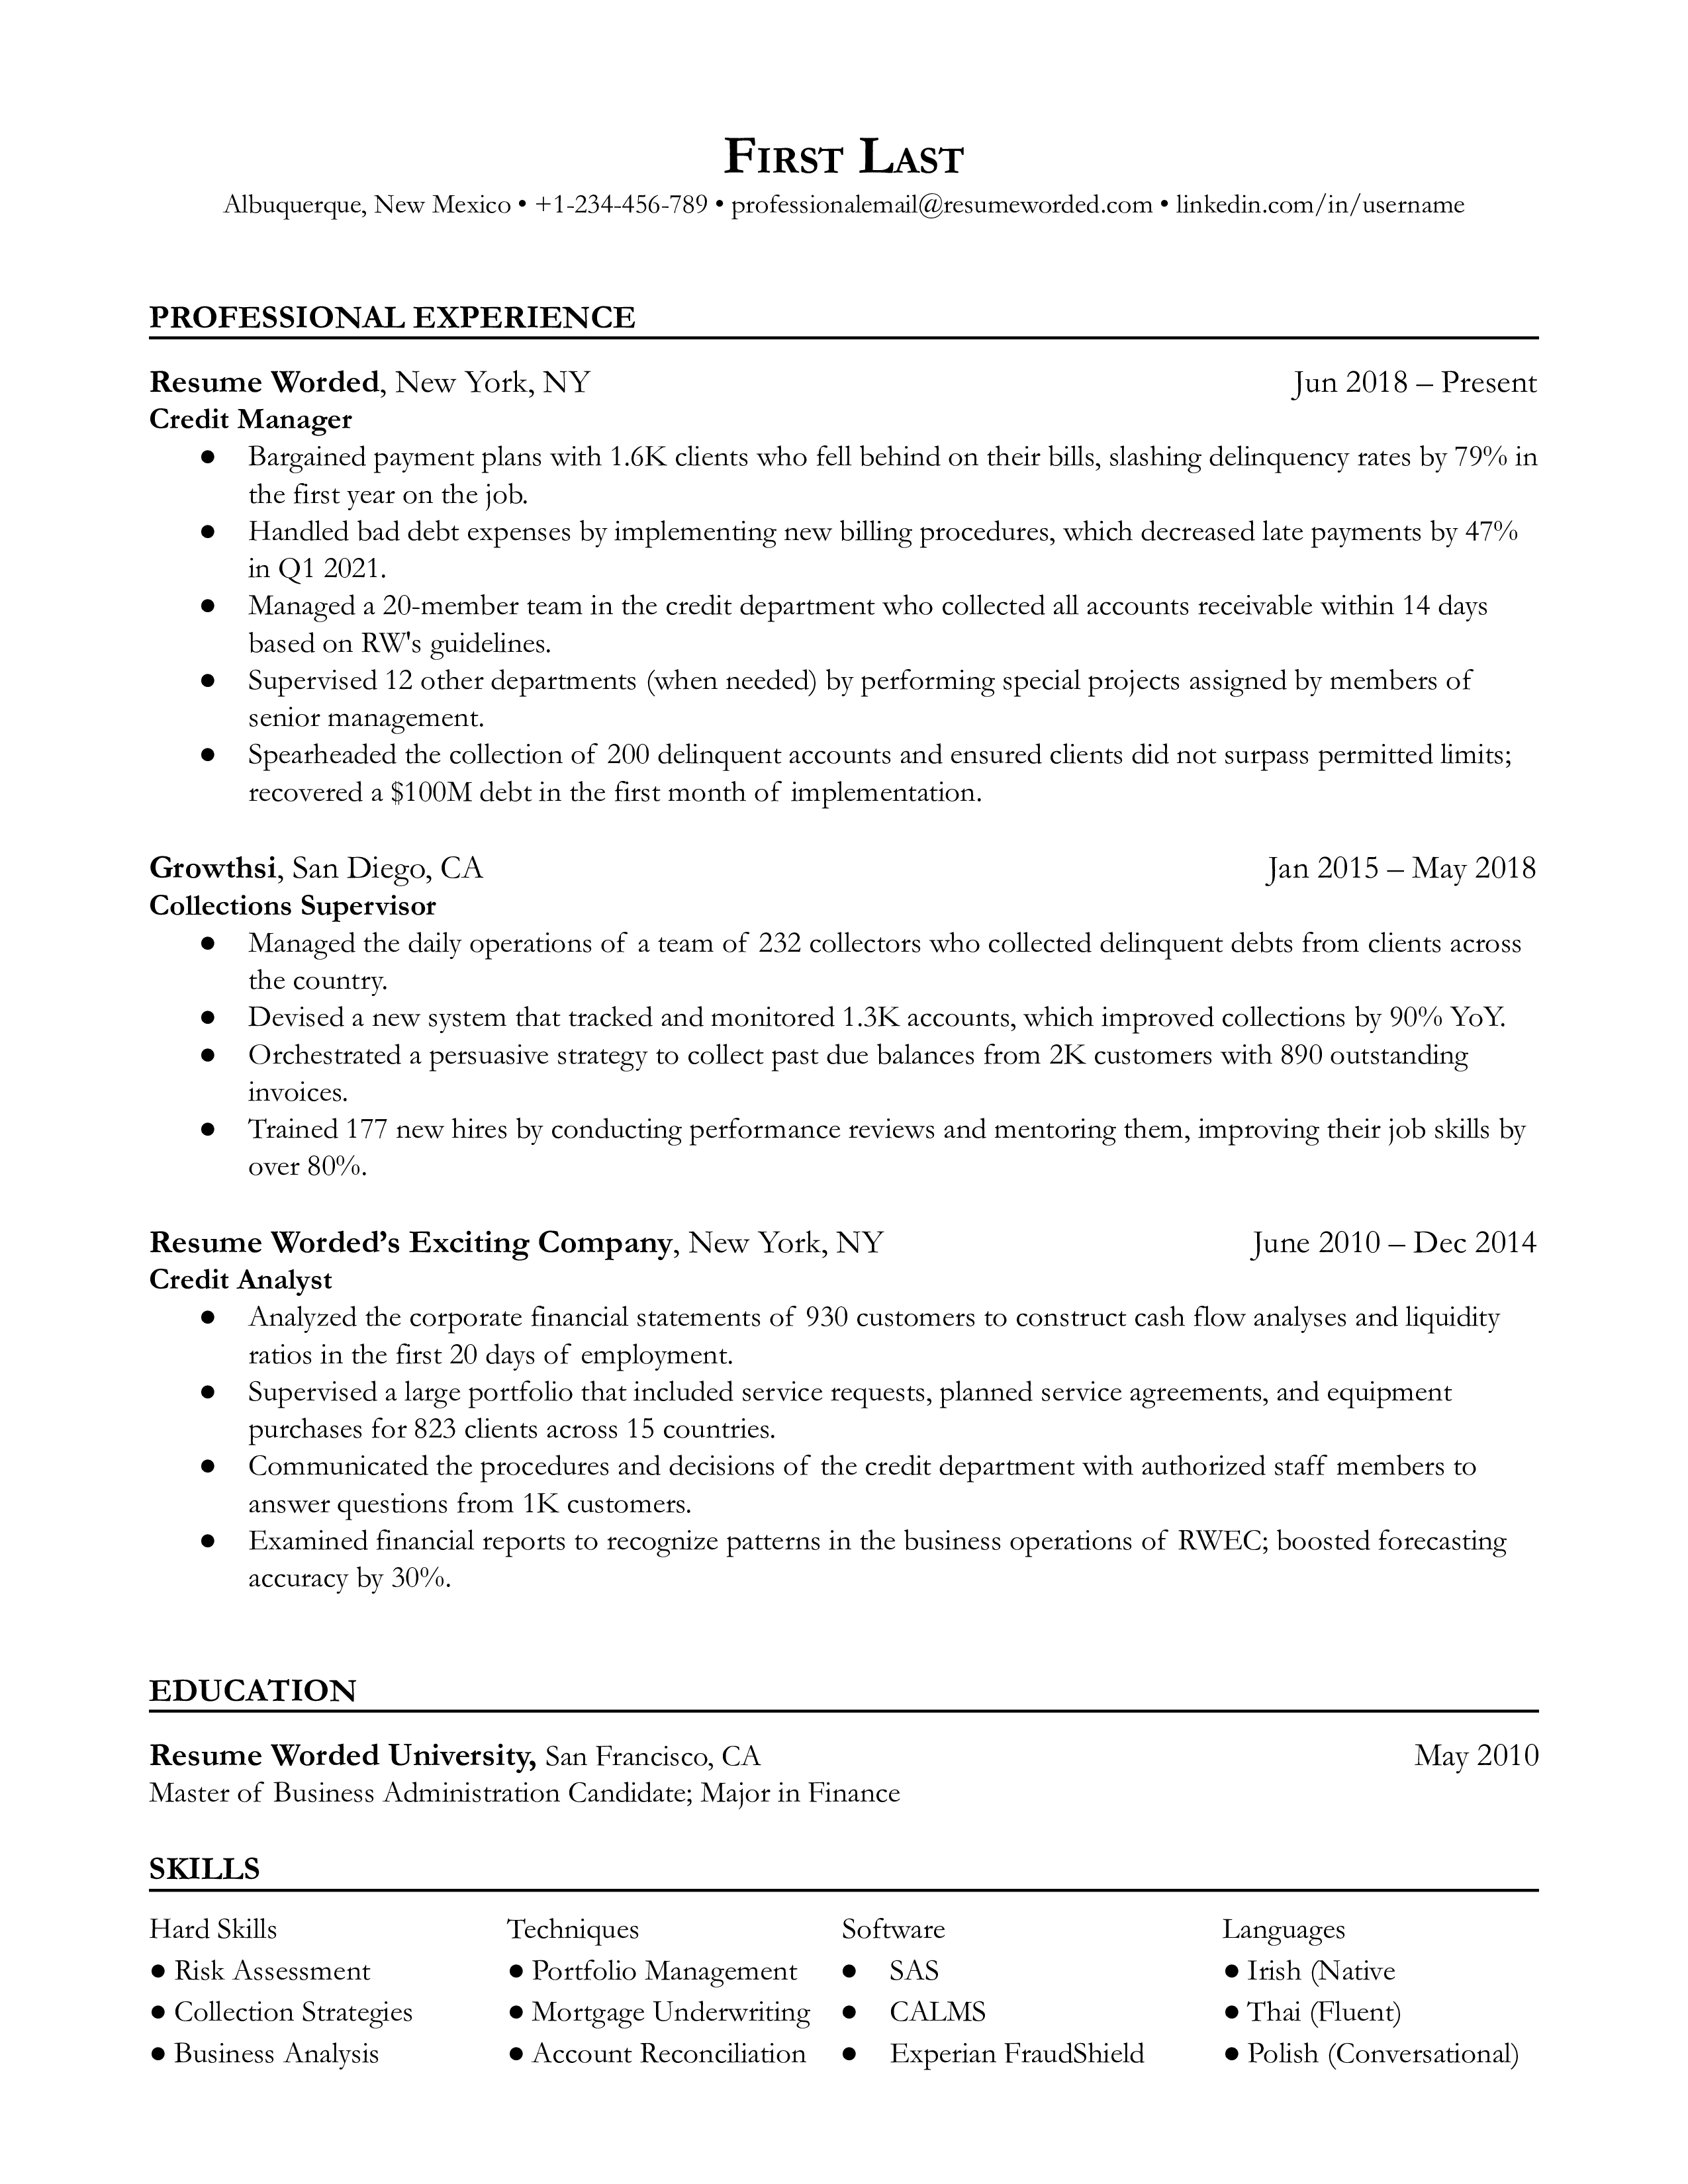 Screenshot of a credit manager's resume with strategic and cross-departmental experience highlights.